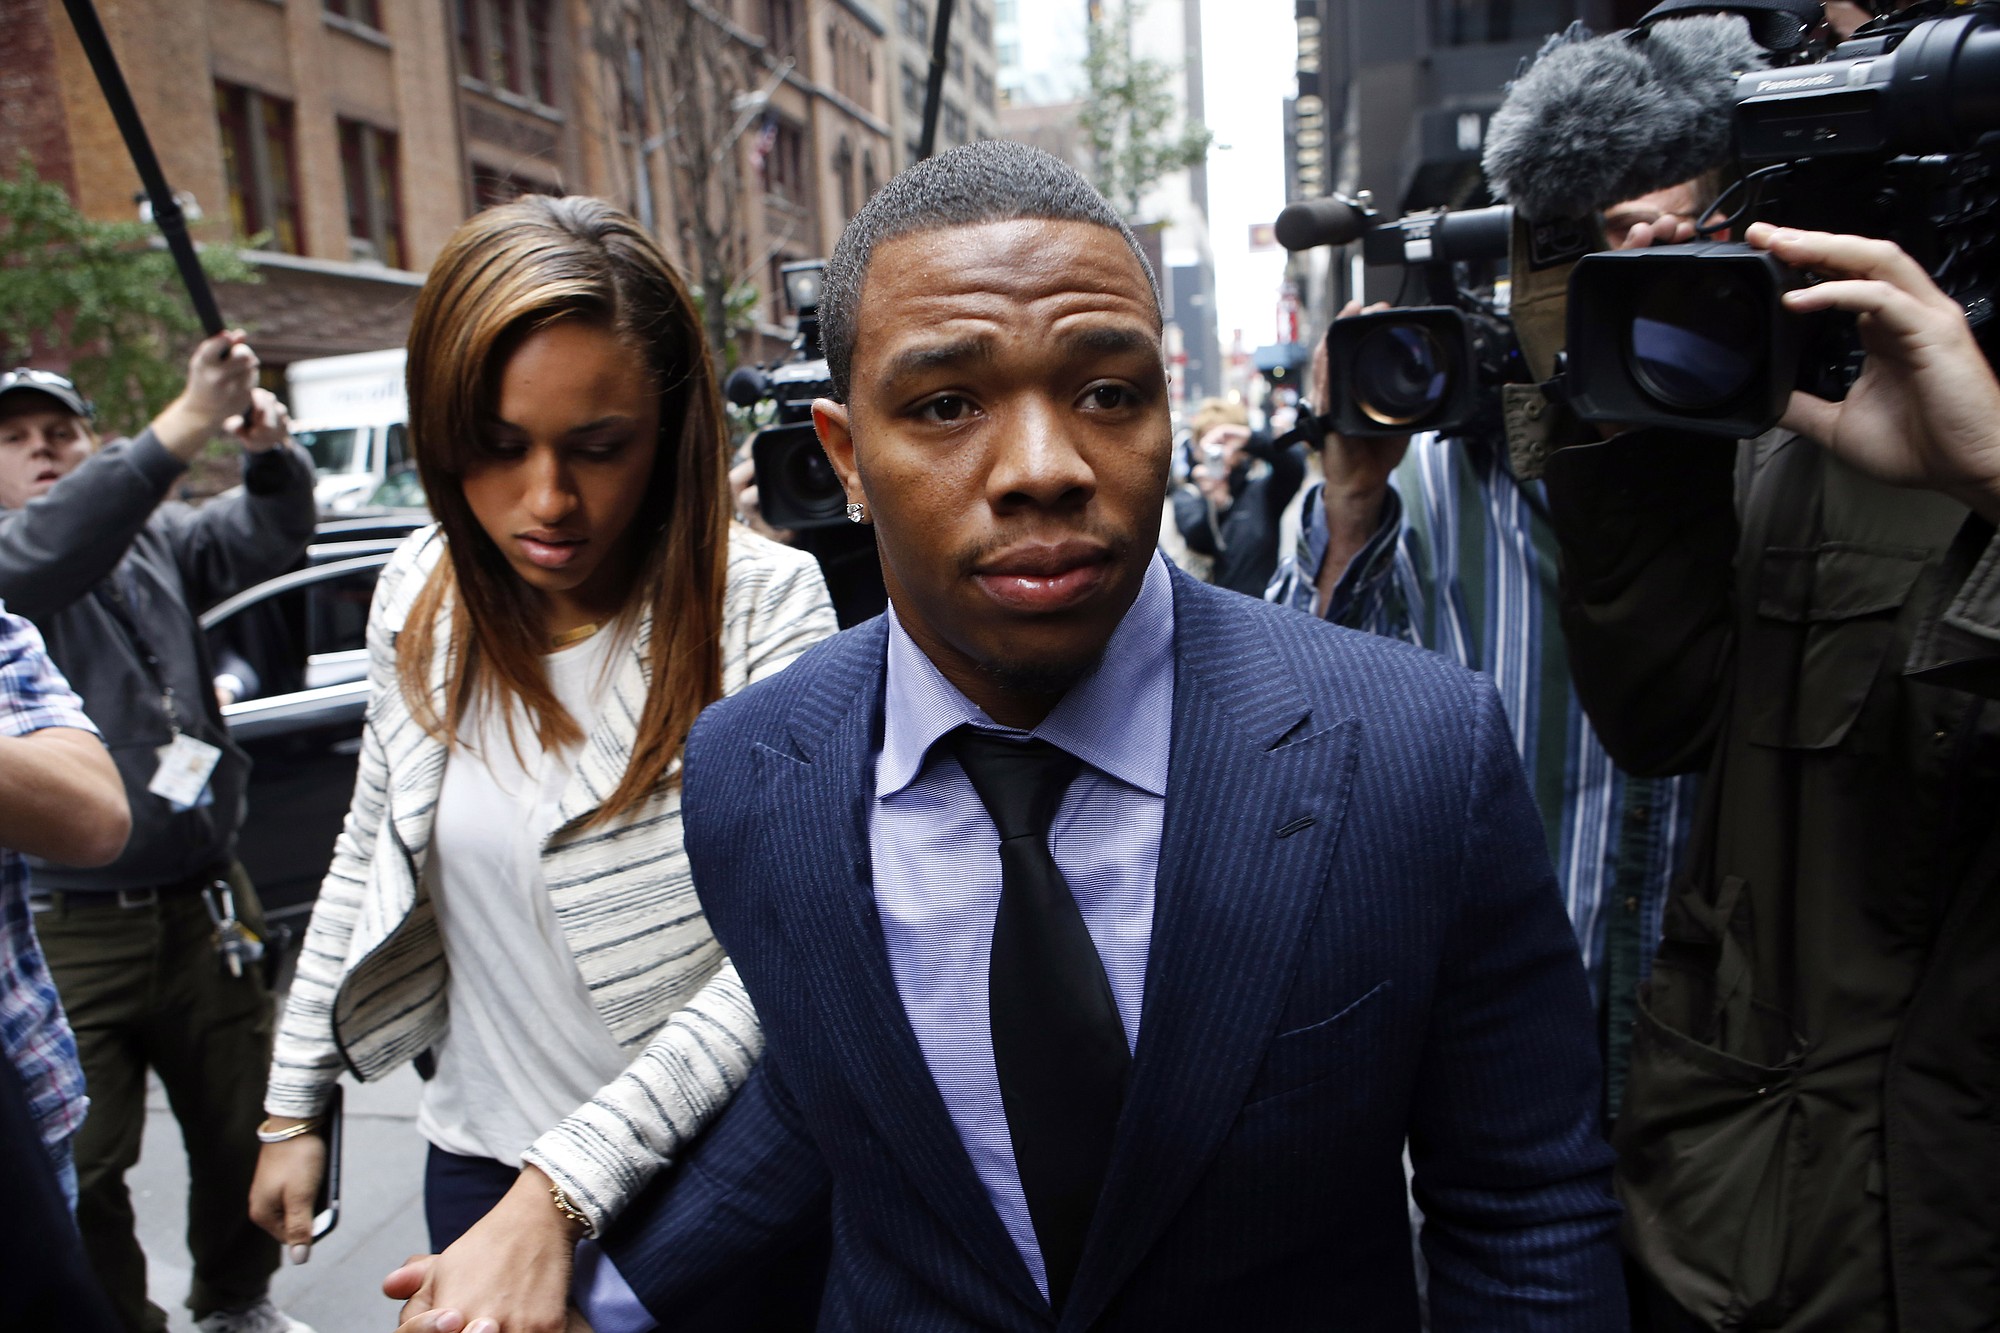 Ray Rice arrives with his wife Janay Palmer for an appeal hearing of his indefinite suspension from the NFL on Nov. 5 in New York.